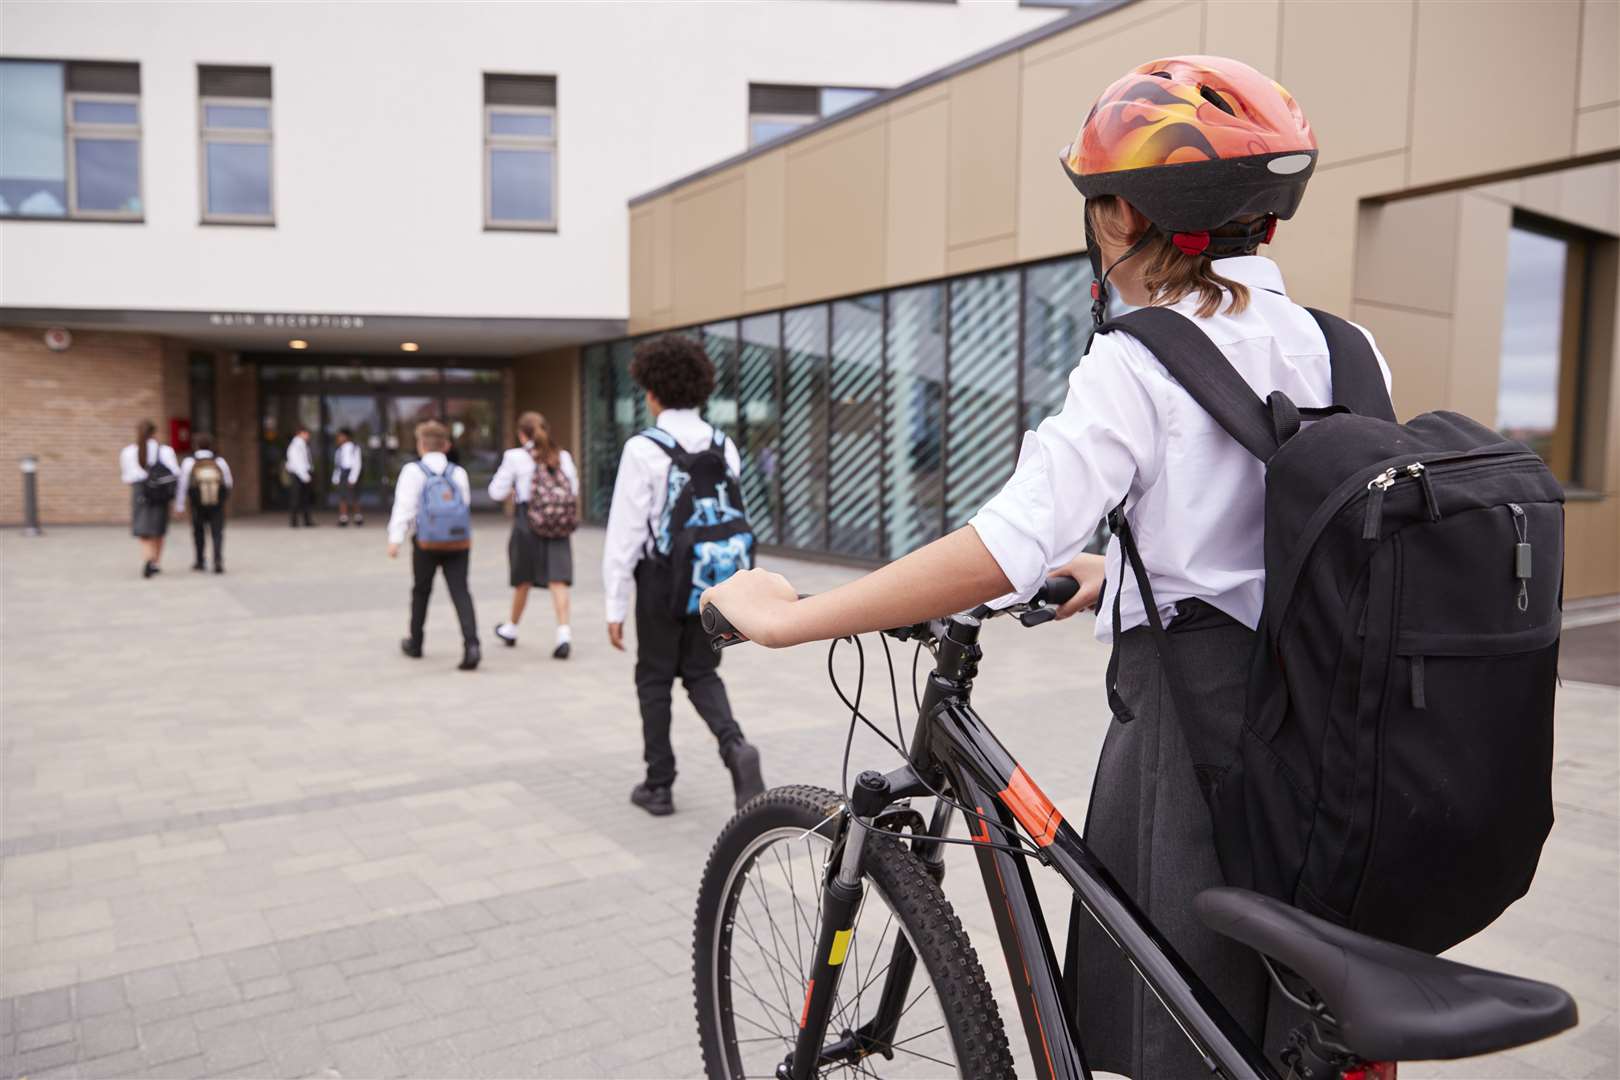 Make sure your child gets to school safely on their bike this summer